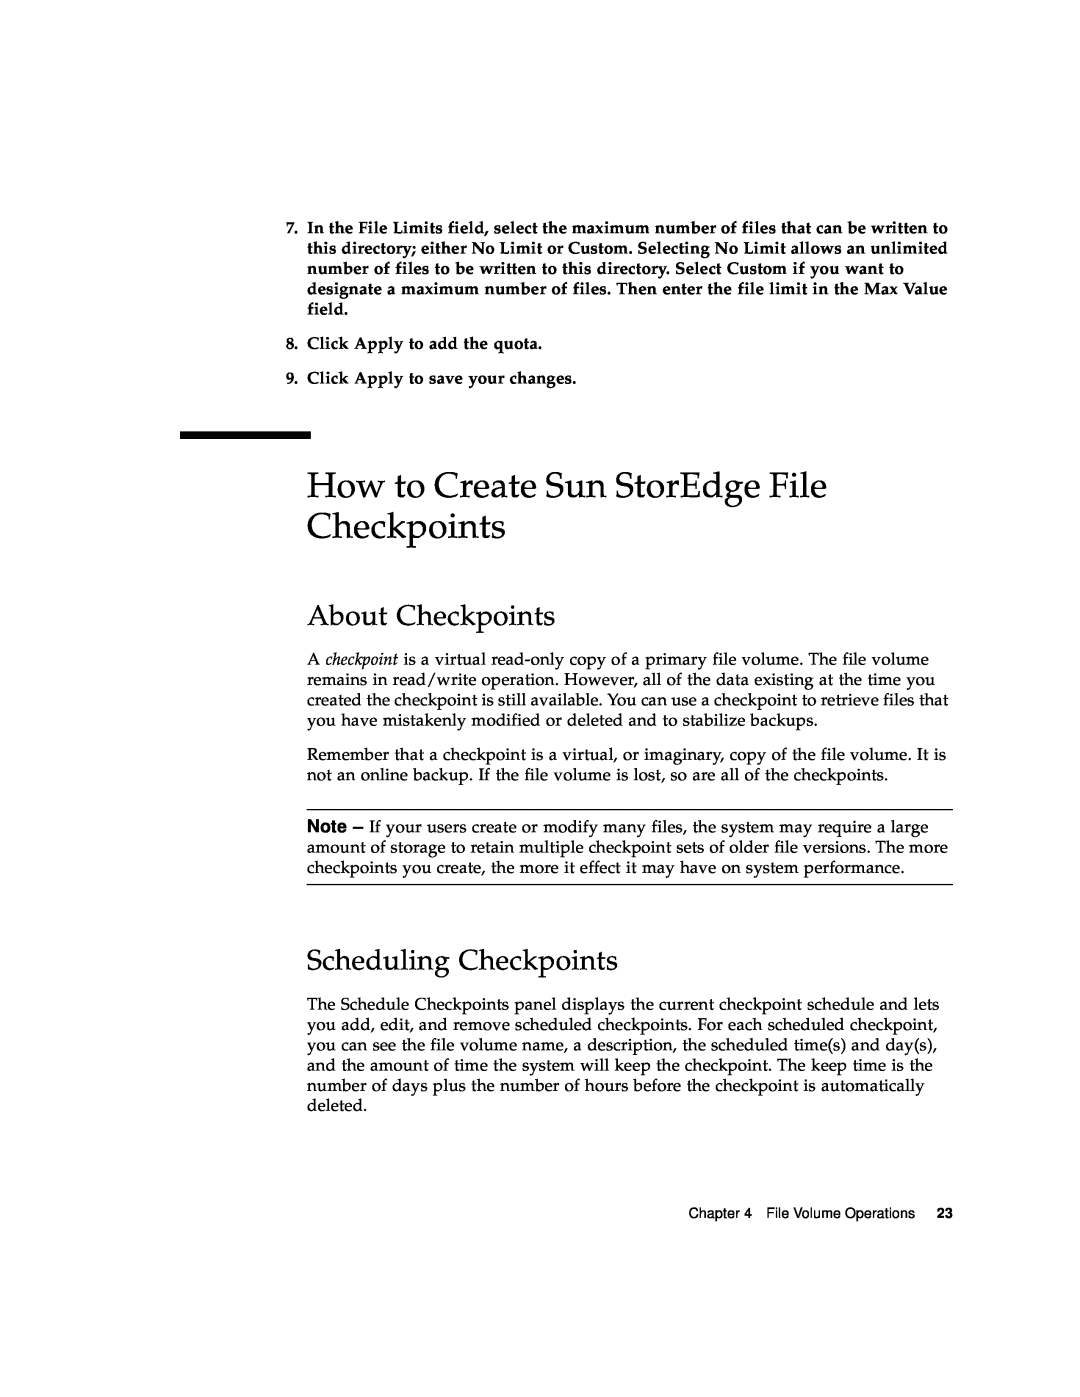 Sun Microsystems 5210 NAS manual How to Create Sun StorEdge File Checkpoints, About Checkpoints, Scheduling Checkpoints 